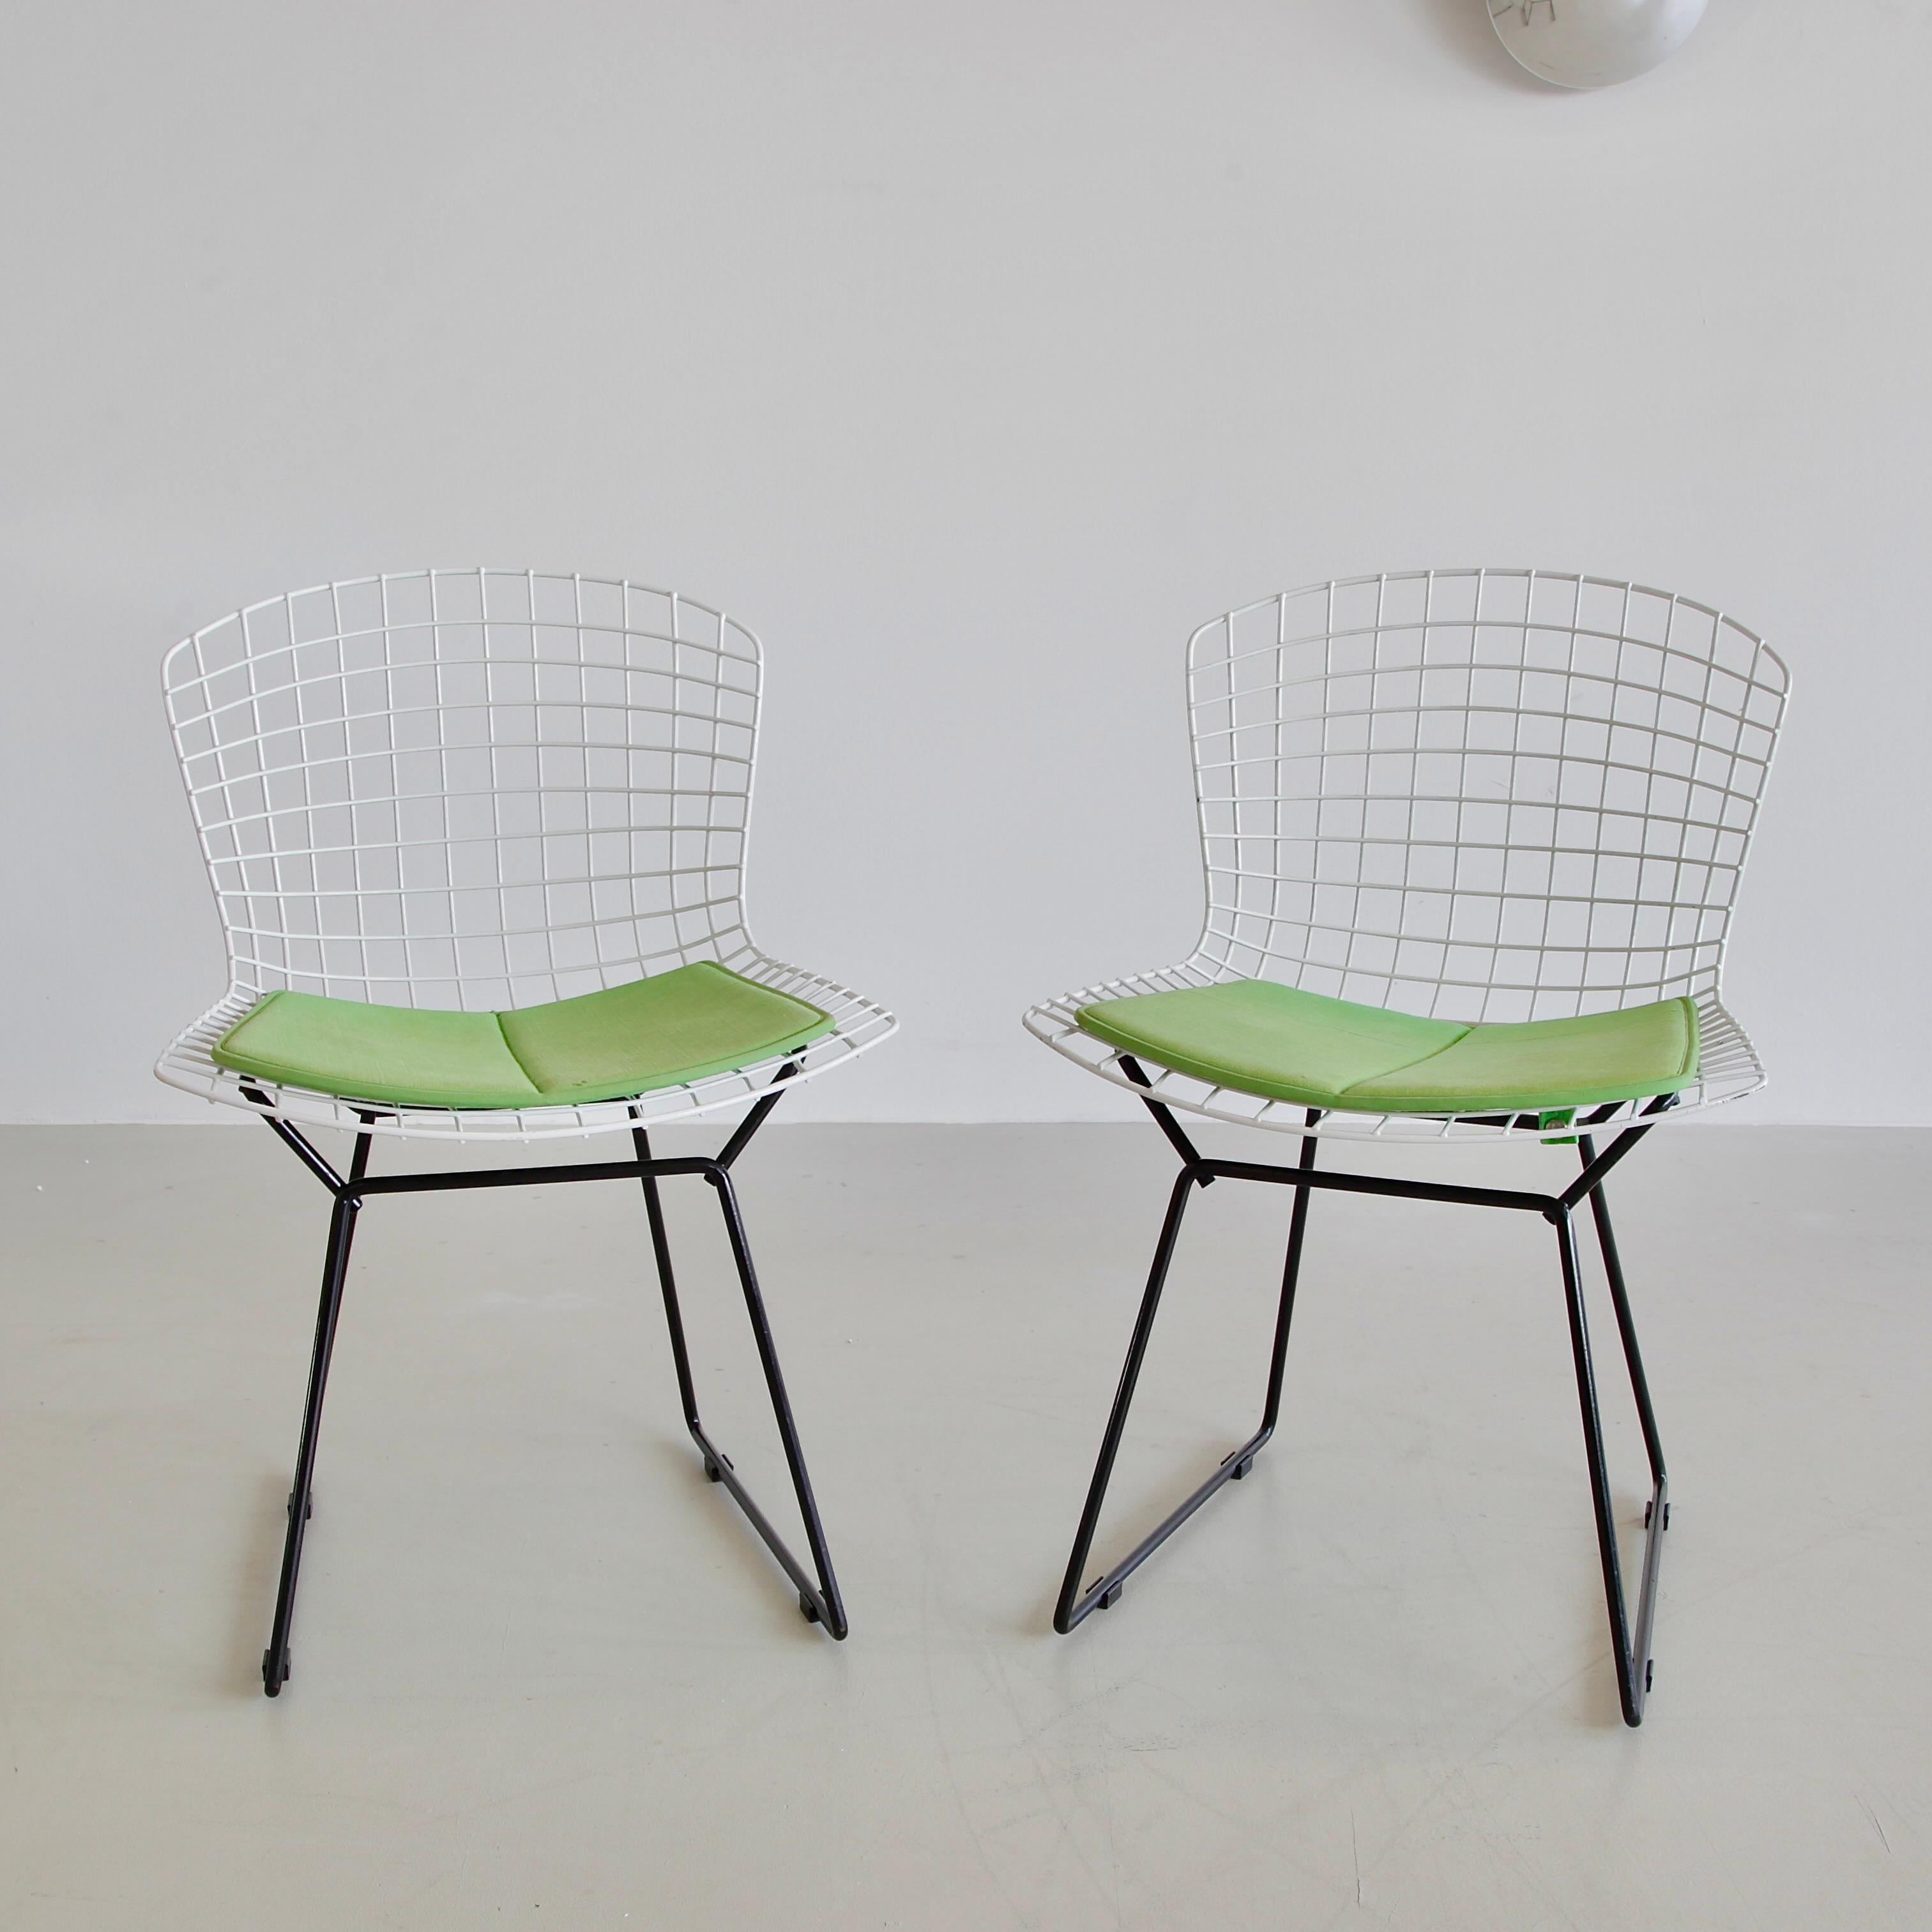 Pair of side chairs, designed by Harry Bertoia. U.S.A., Knoll International, 1970s.

Vintage pair of black and white side chairs with green coloured pads. The Bertoia Diamond Armchair, originally designed in 1952, this pair dates from the 1980s,